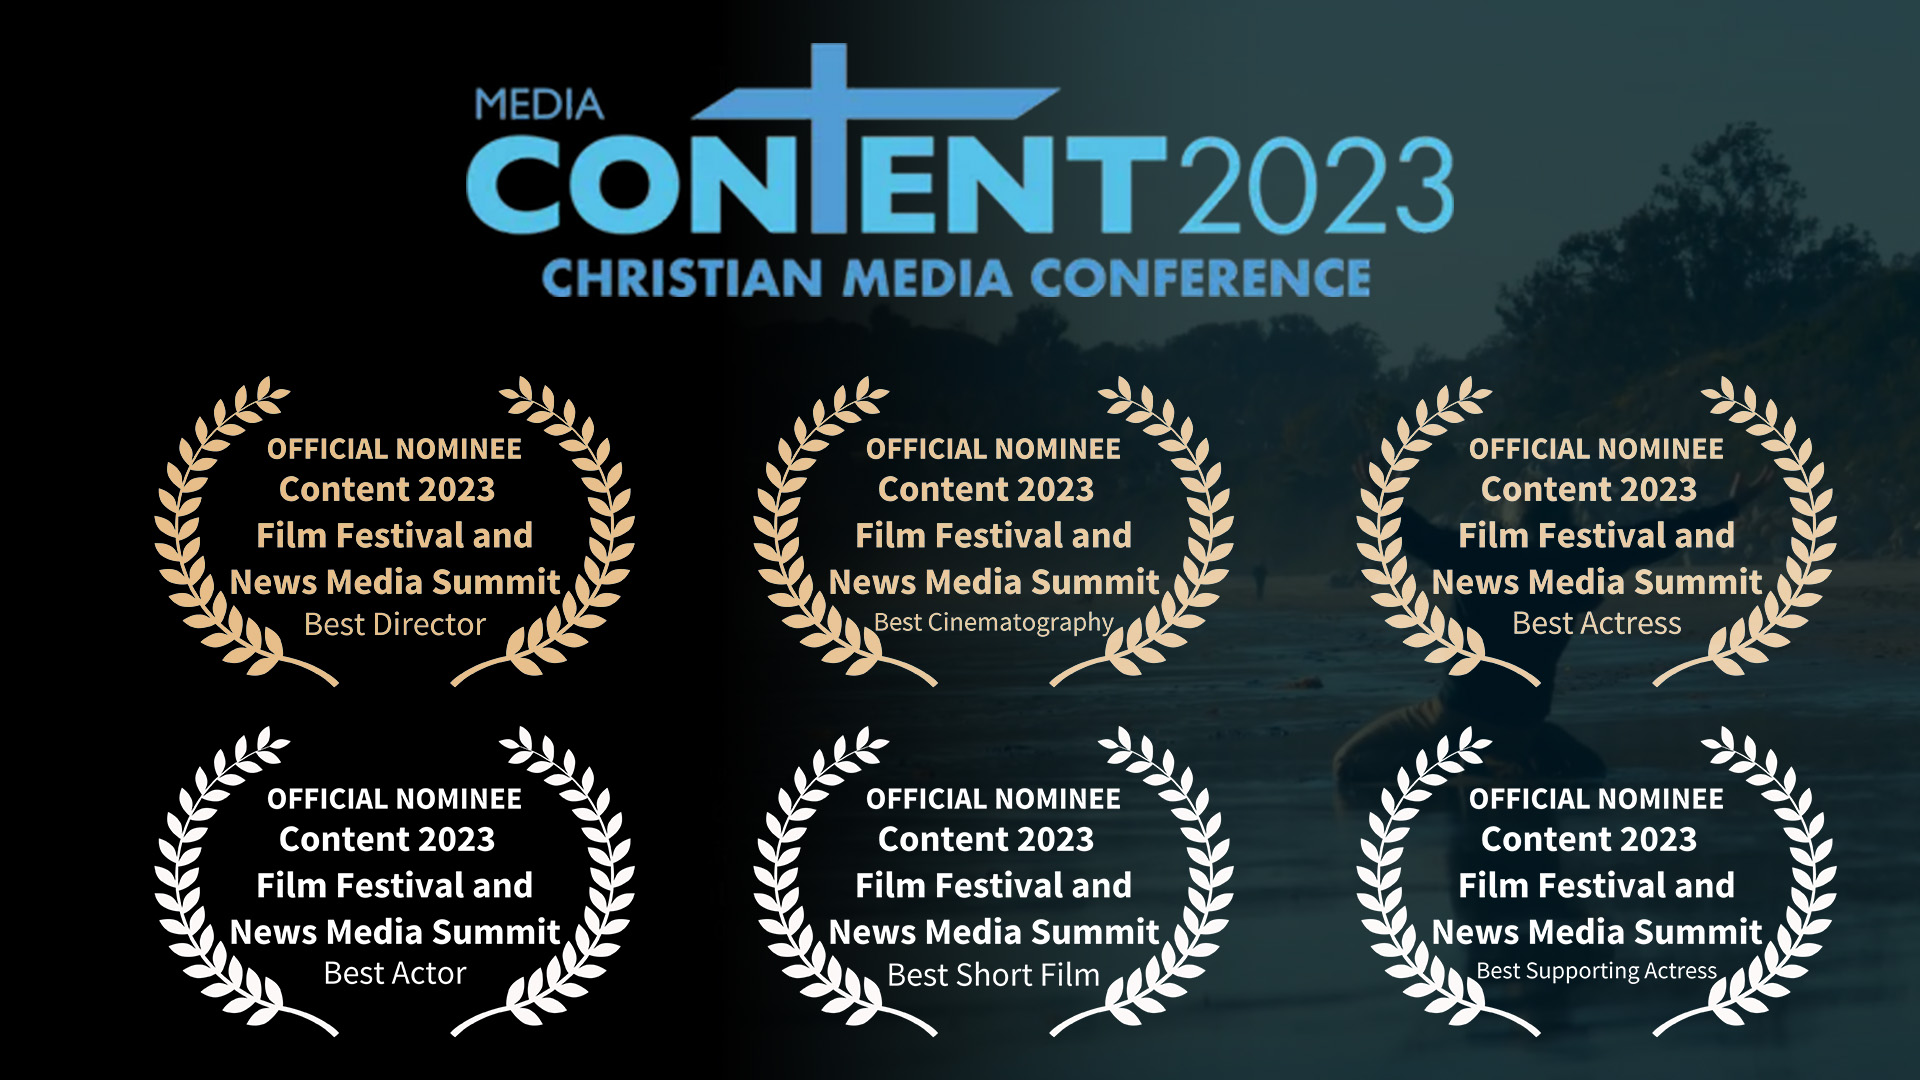 Content 2023 Christian Media Conference Awards